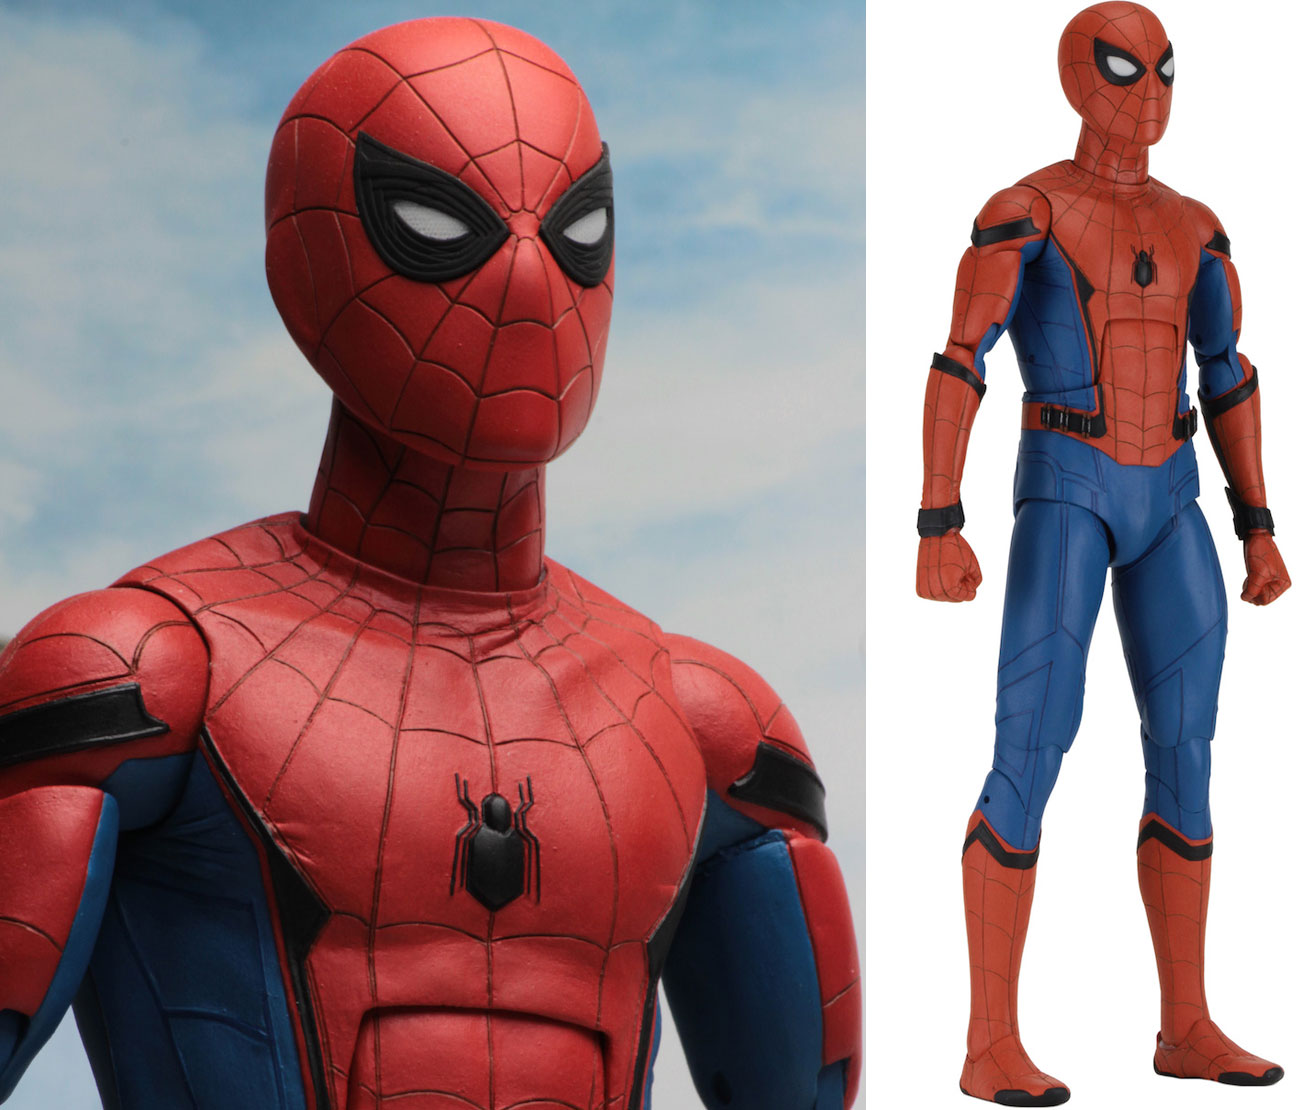 Spider-Man Homecoming 1/4 Scale Action Figure by NECA ... - Neca SpiDer Man Homecoming Action Figure